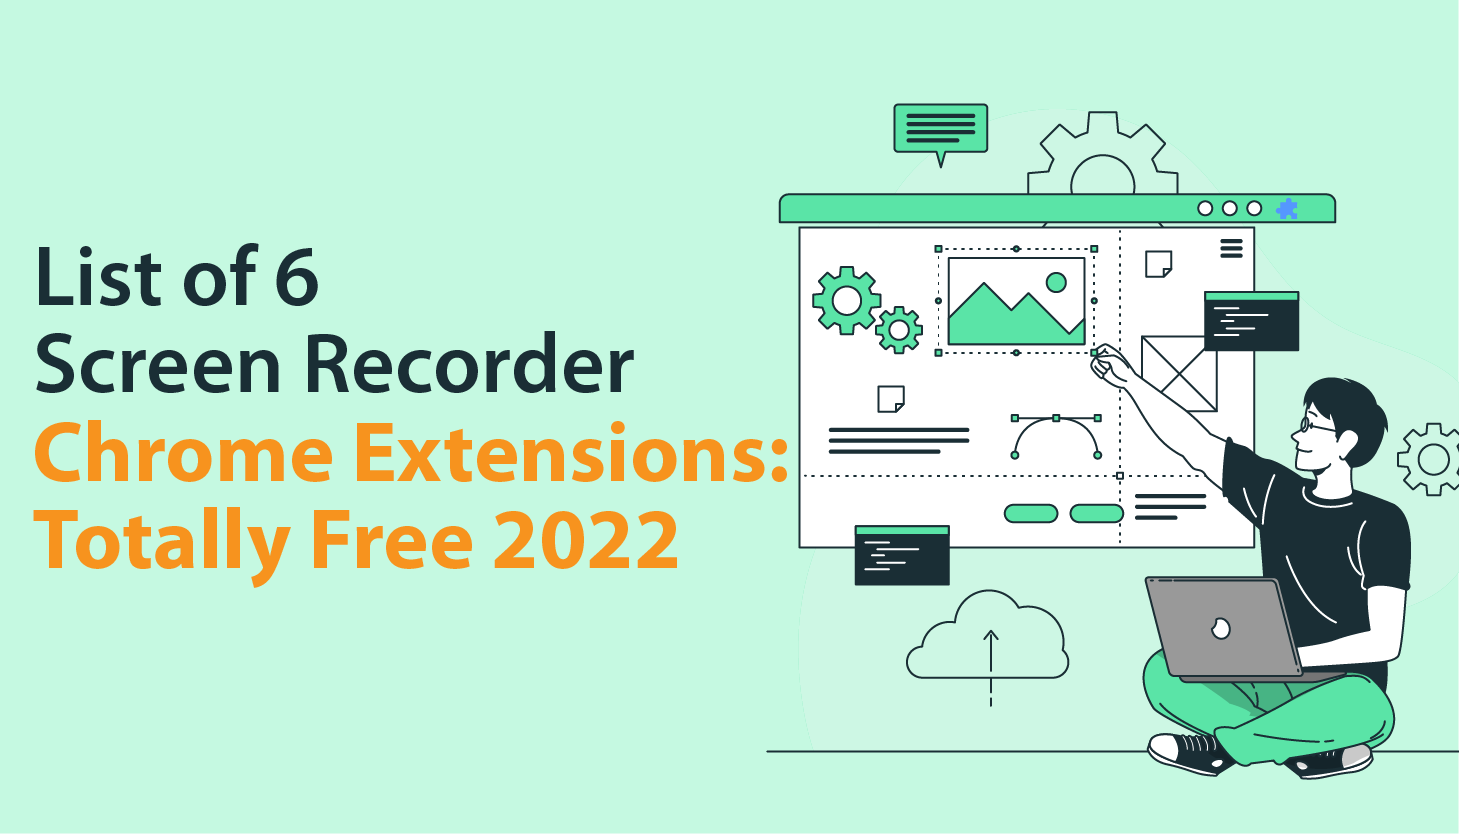  List of 6 Screen Recorder Chrome Extensions: Totally Free 2022